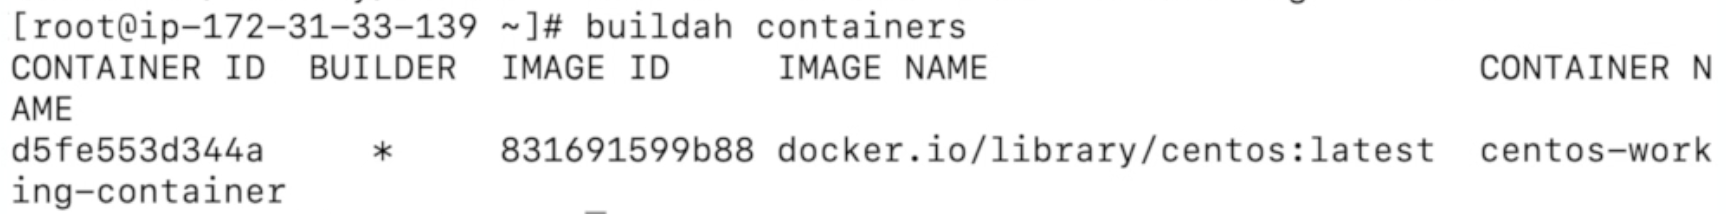 Listing our stored container images